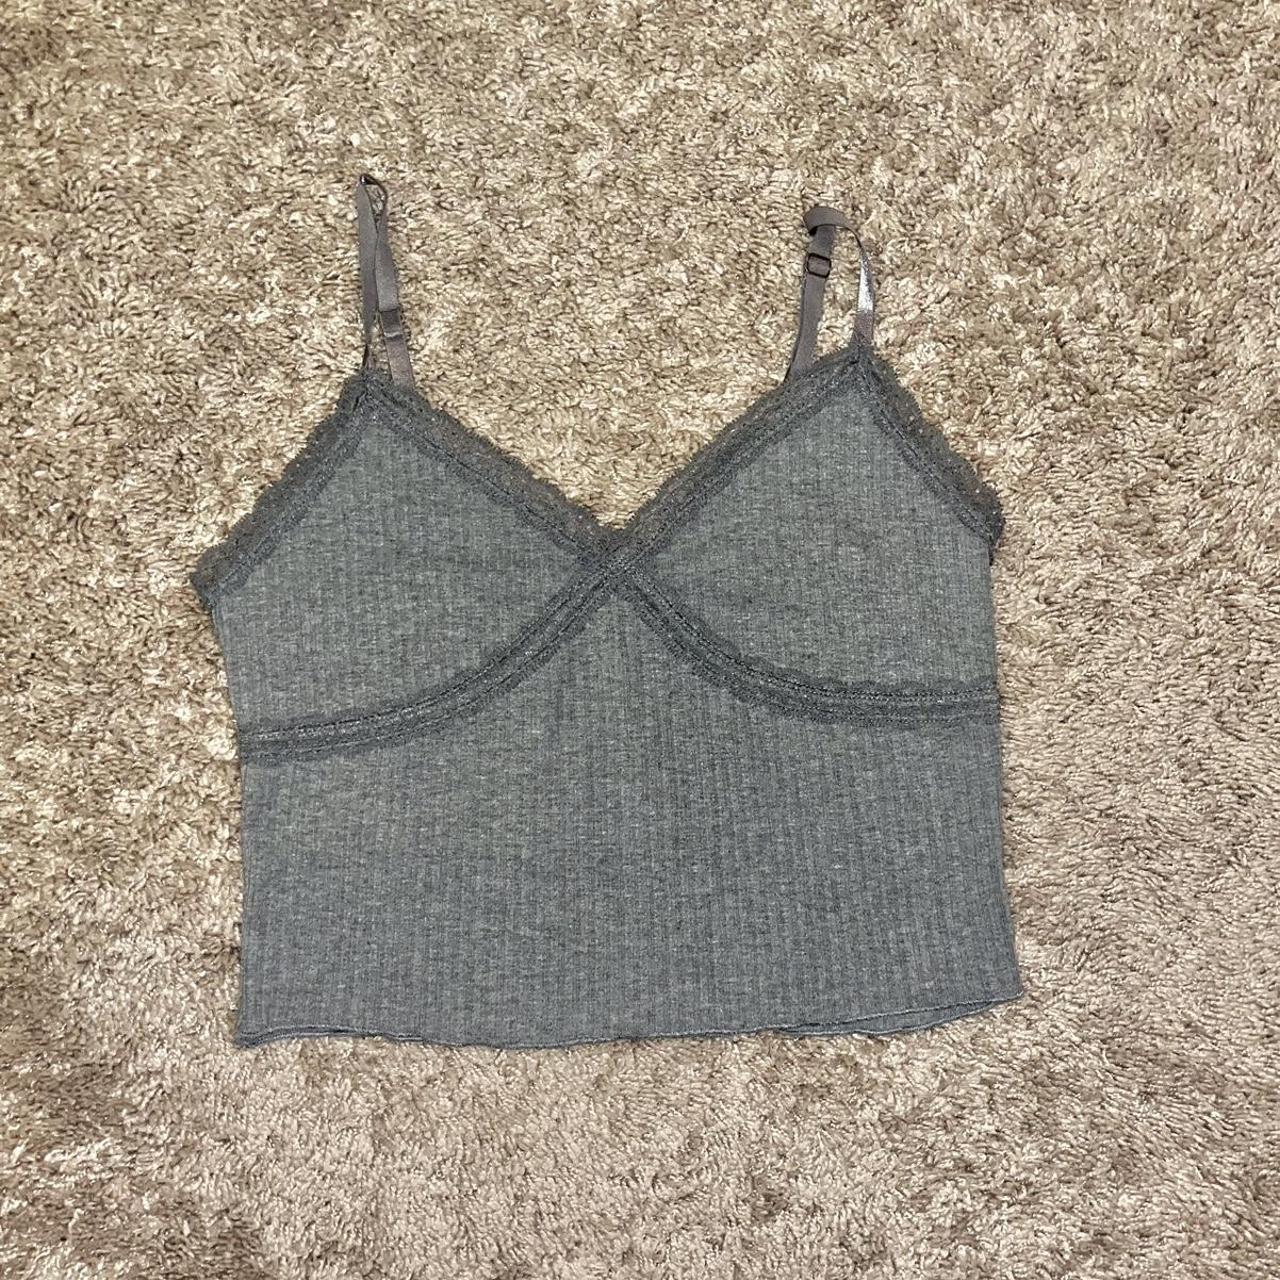 Wild fable (Target brand) Grey Lace Tank top Cami in... - Depop